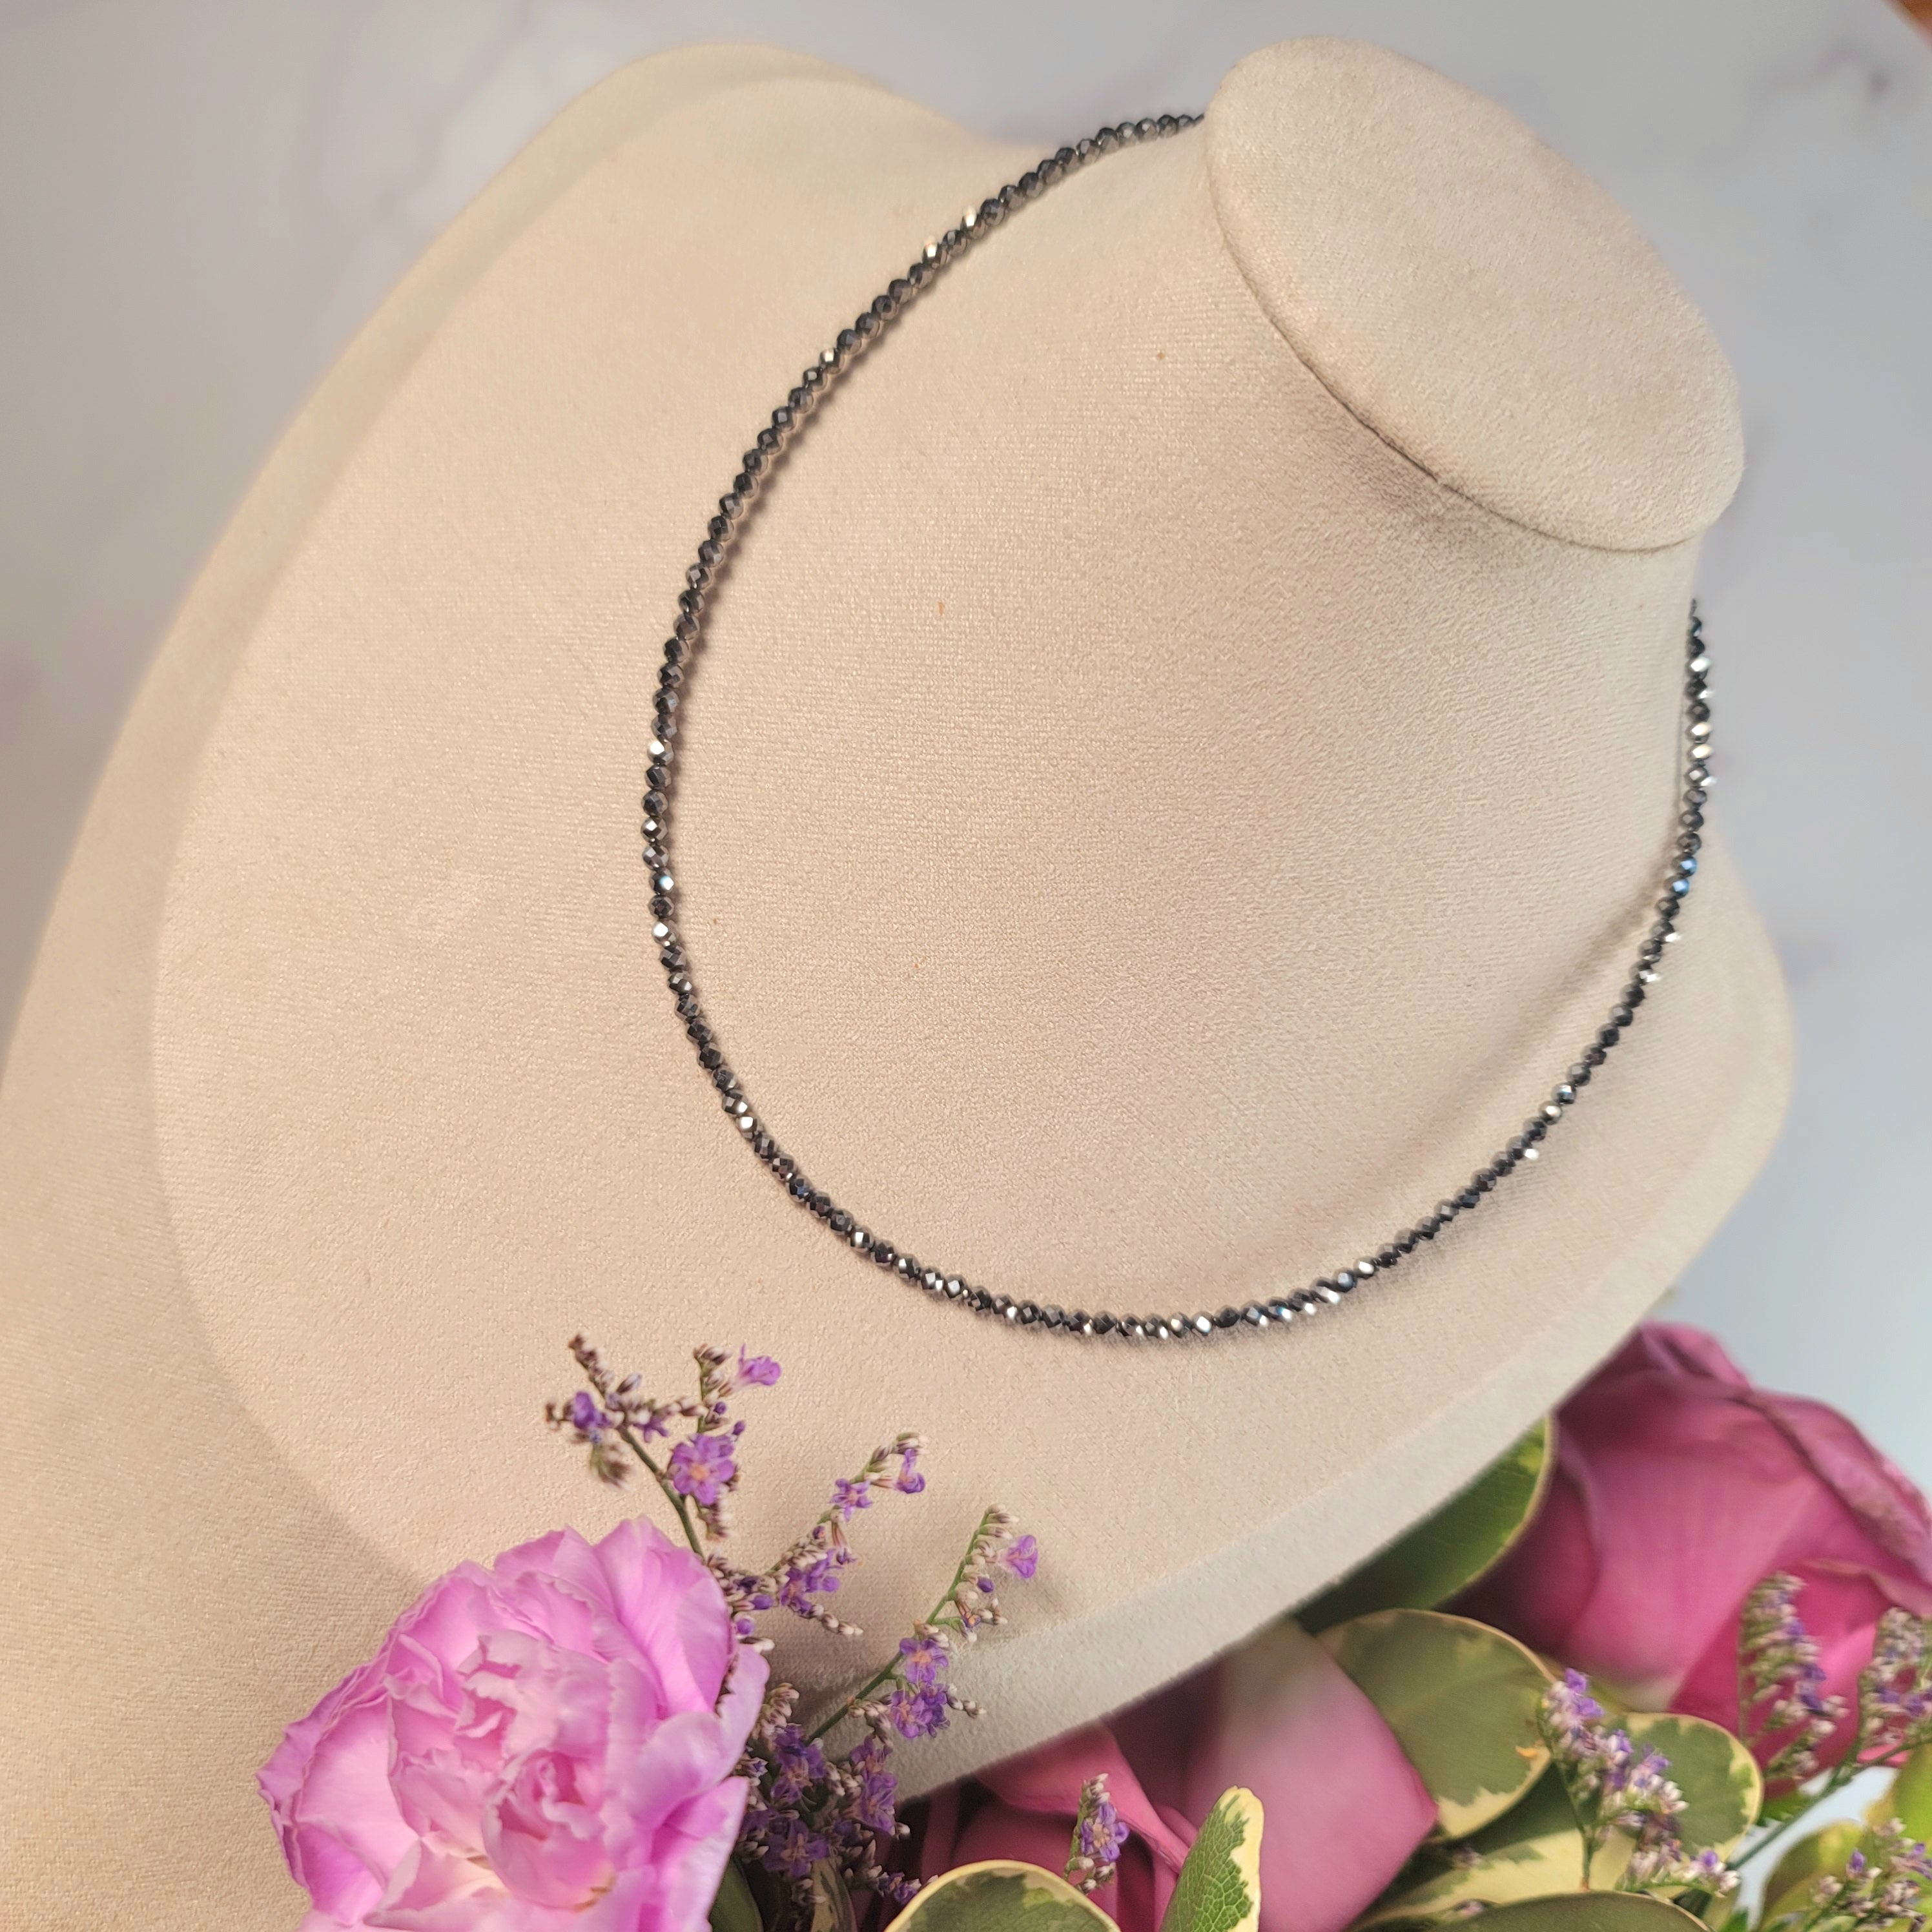 Hematite Micro Faceted Choker/Layering Necklace .925 Silver for Manifestation of Dreams into Reality